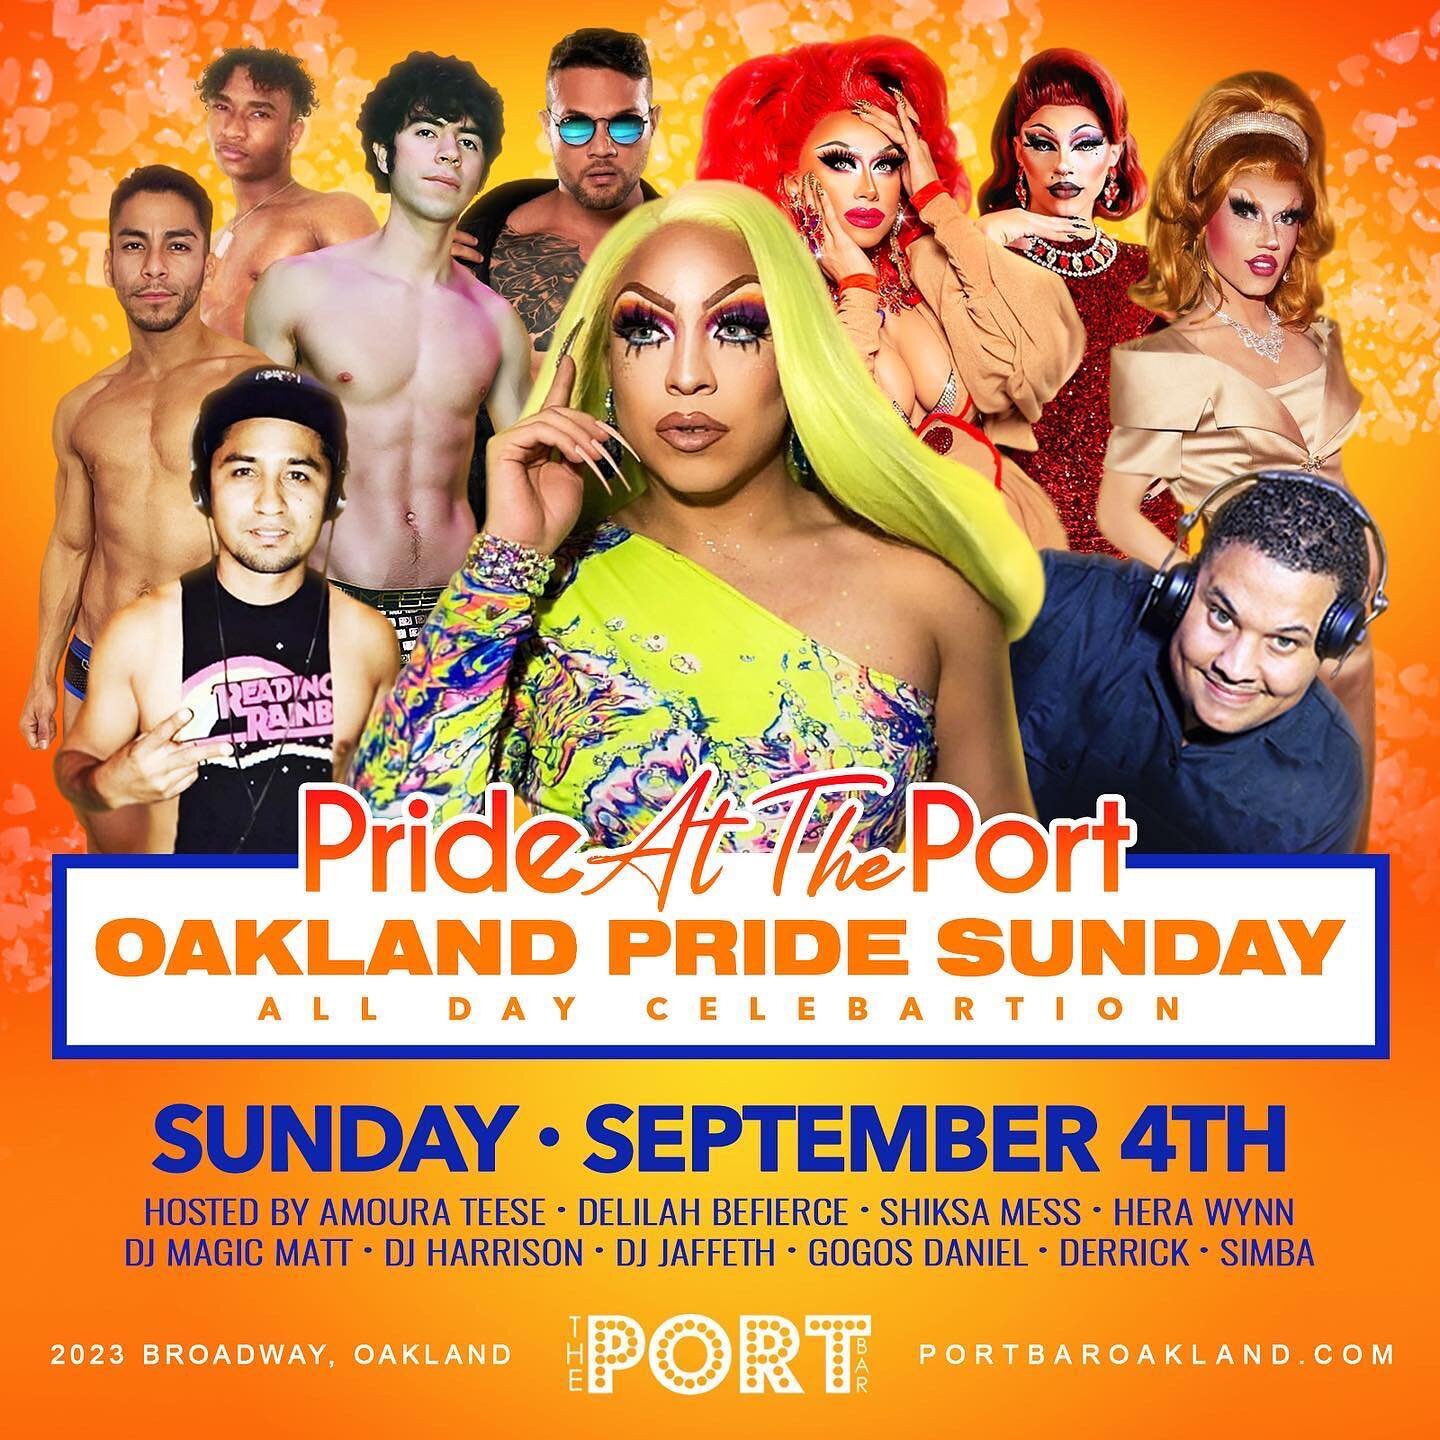 Join us as we celebrate 2 years of incredibly successful Drag Brunch at The Port Bar w/the talent that's made it all possible, Amoura Teese &amp; Magic Matt. Sundays 2pm show is nearly SOLD OUT, get the last remaining seats for 11:30 &amp; 2pm NOW!

